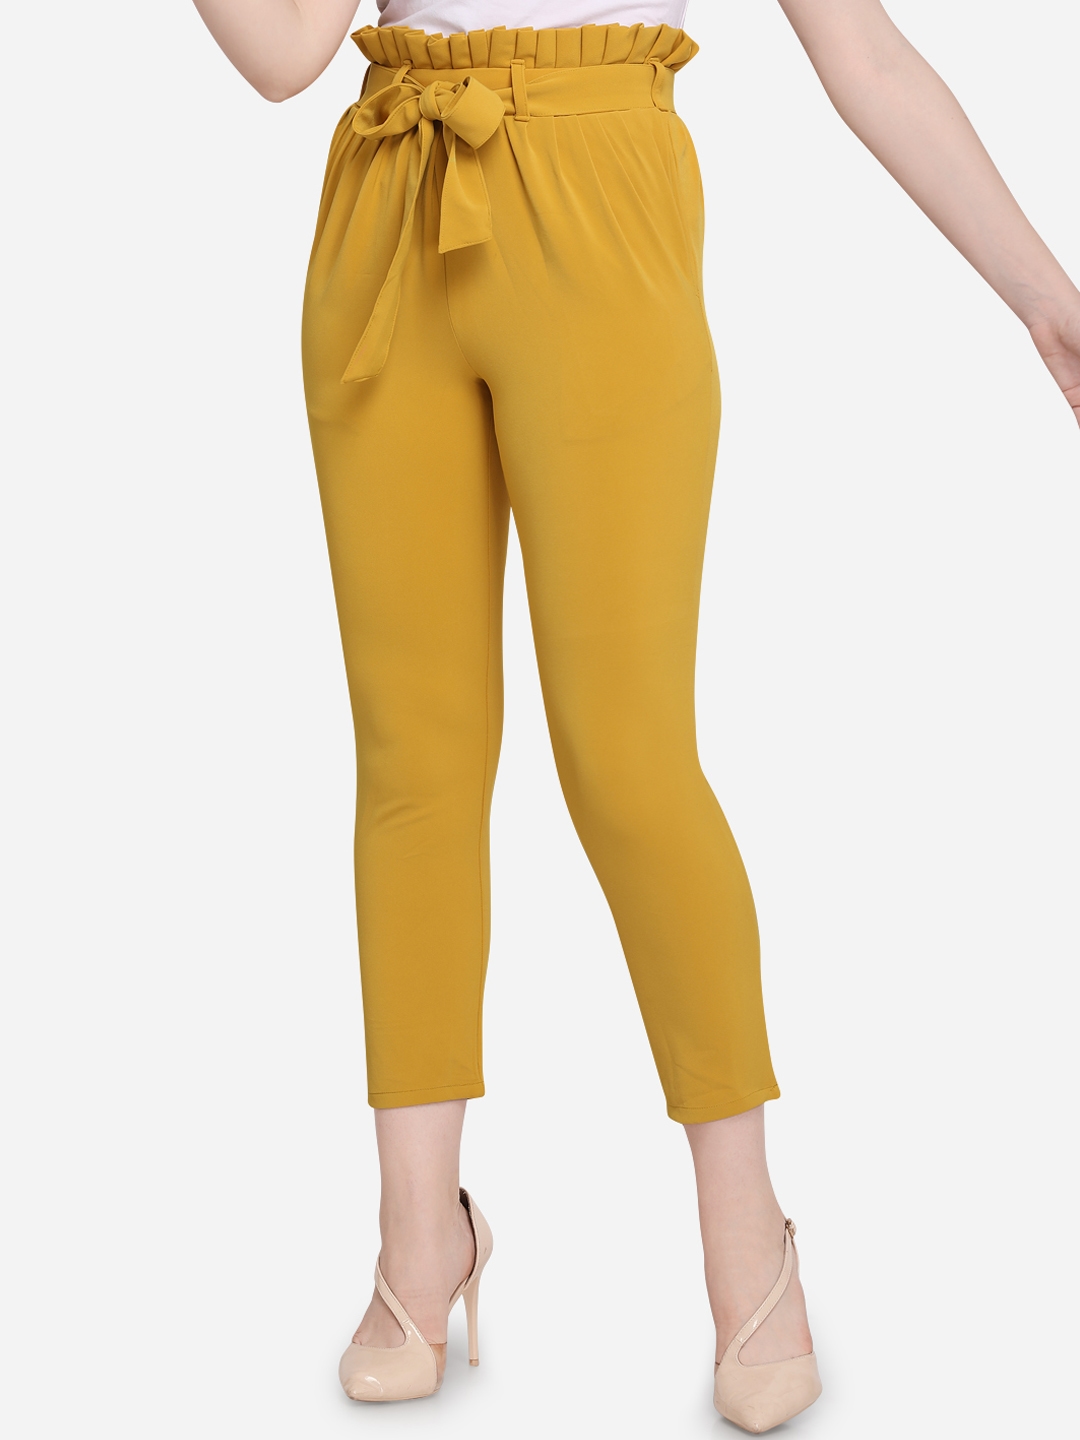 Buy INDYA Cigarette Trousers online - Women - 13 products | FASHIOLA.in